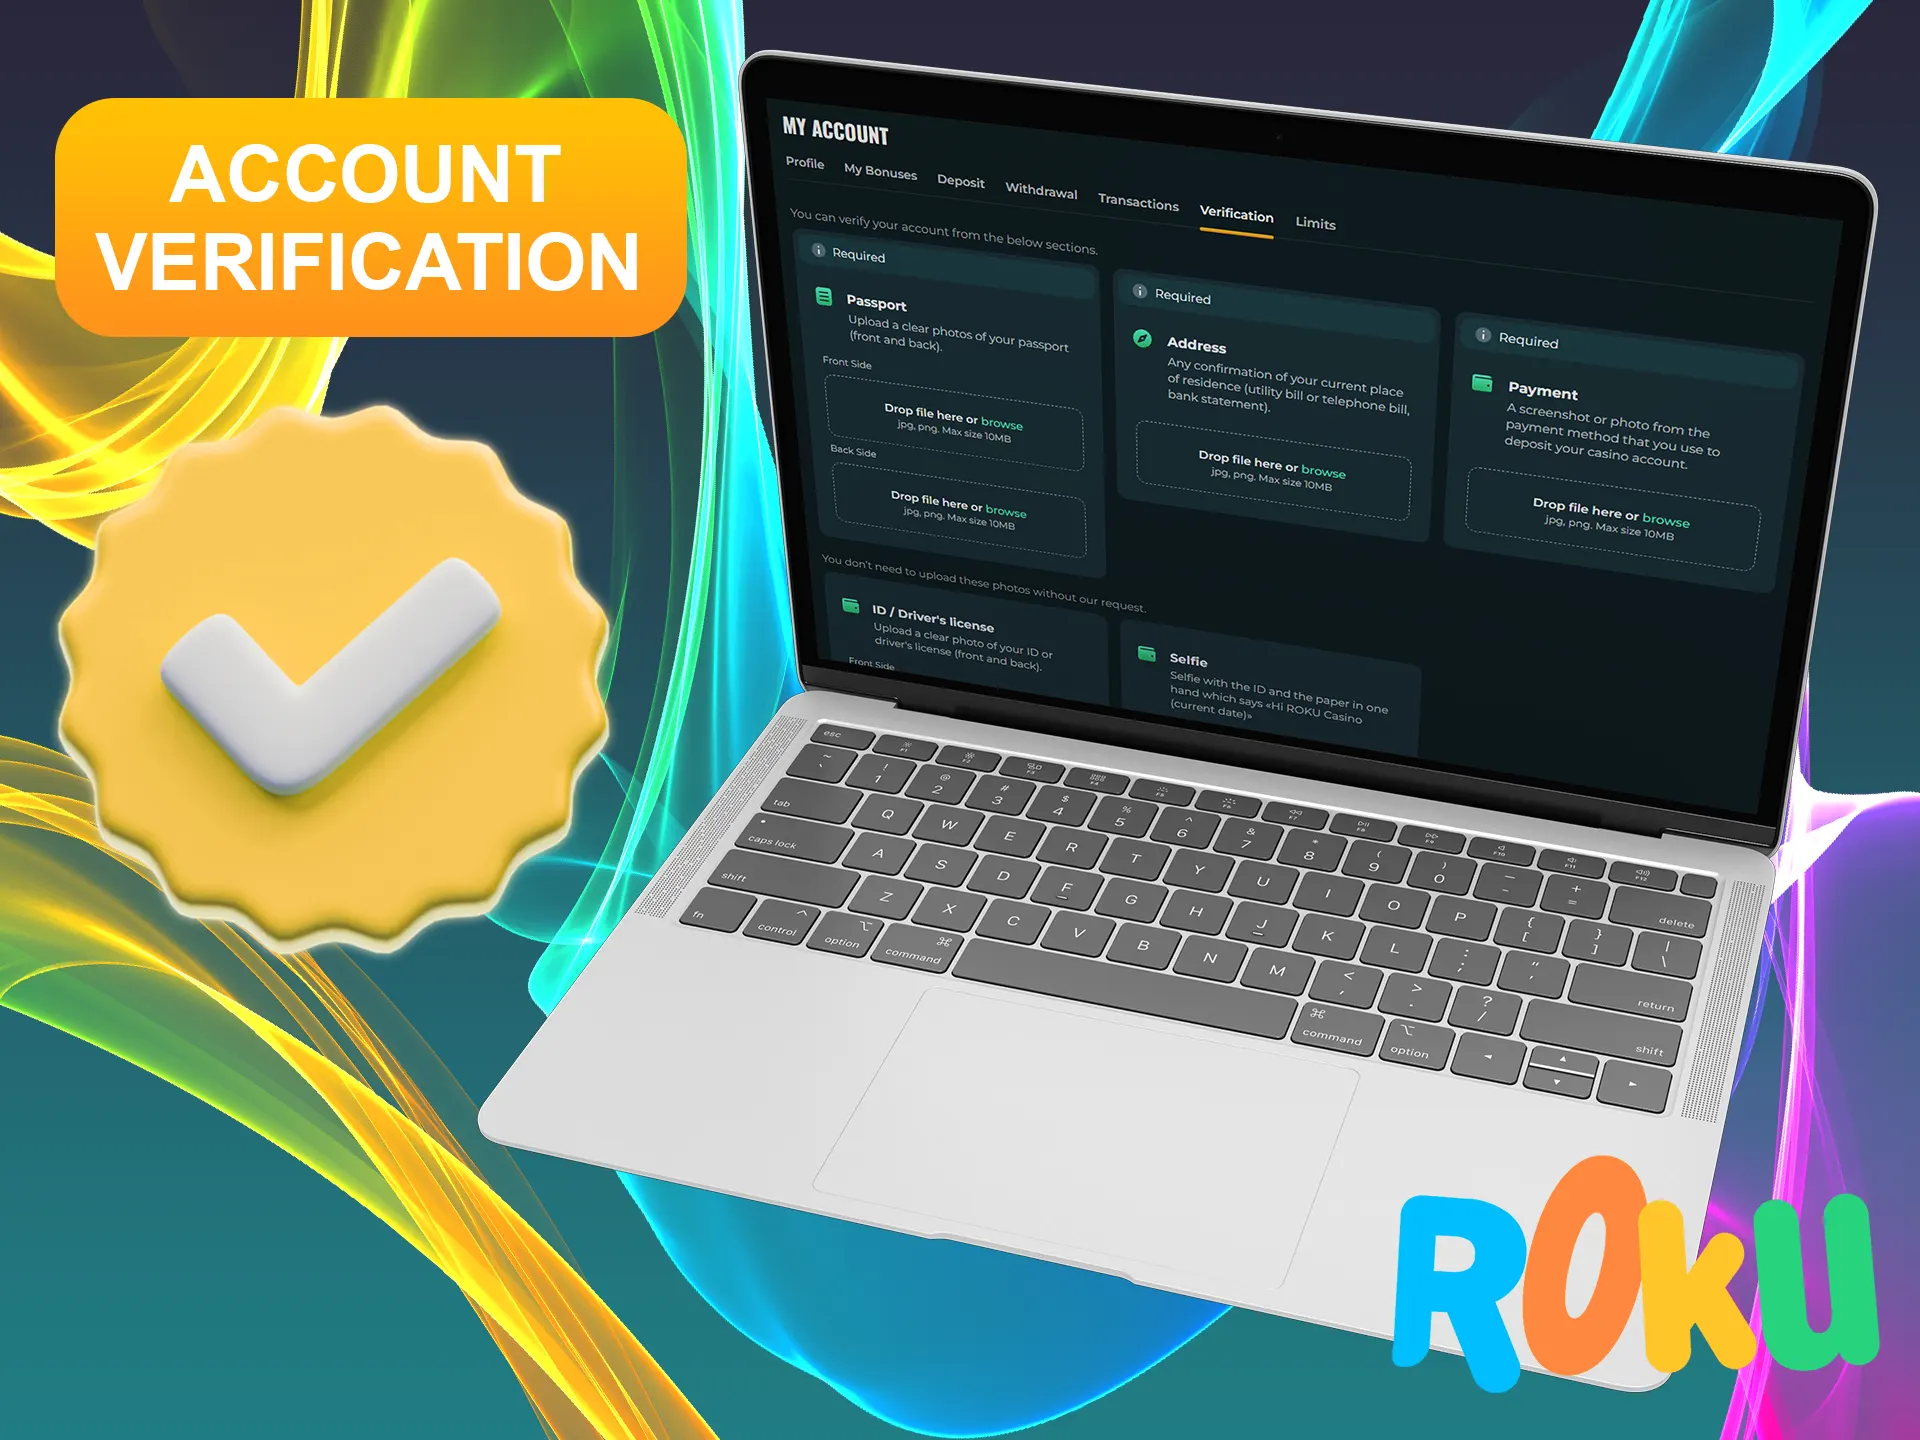 Verify your Rokubet account by providing required data.